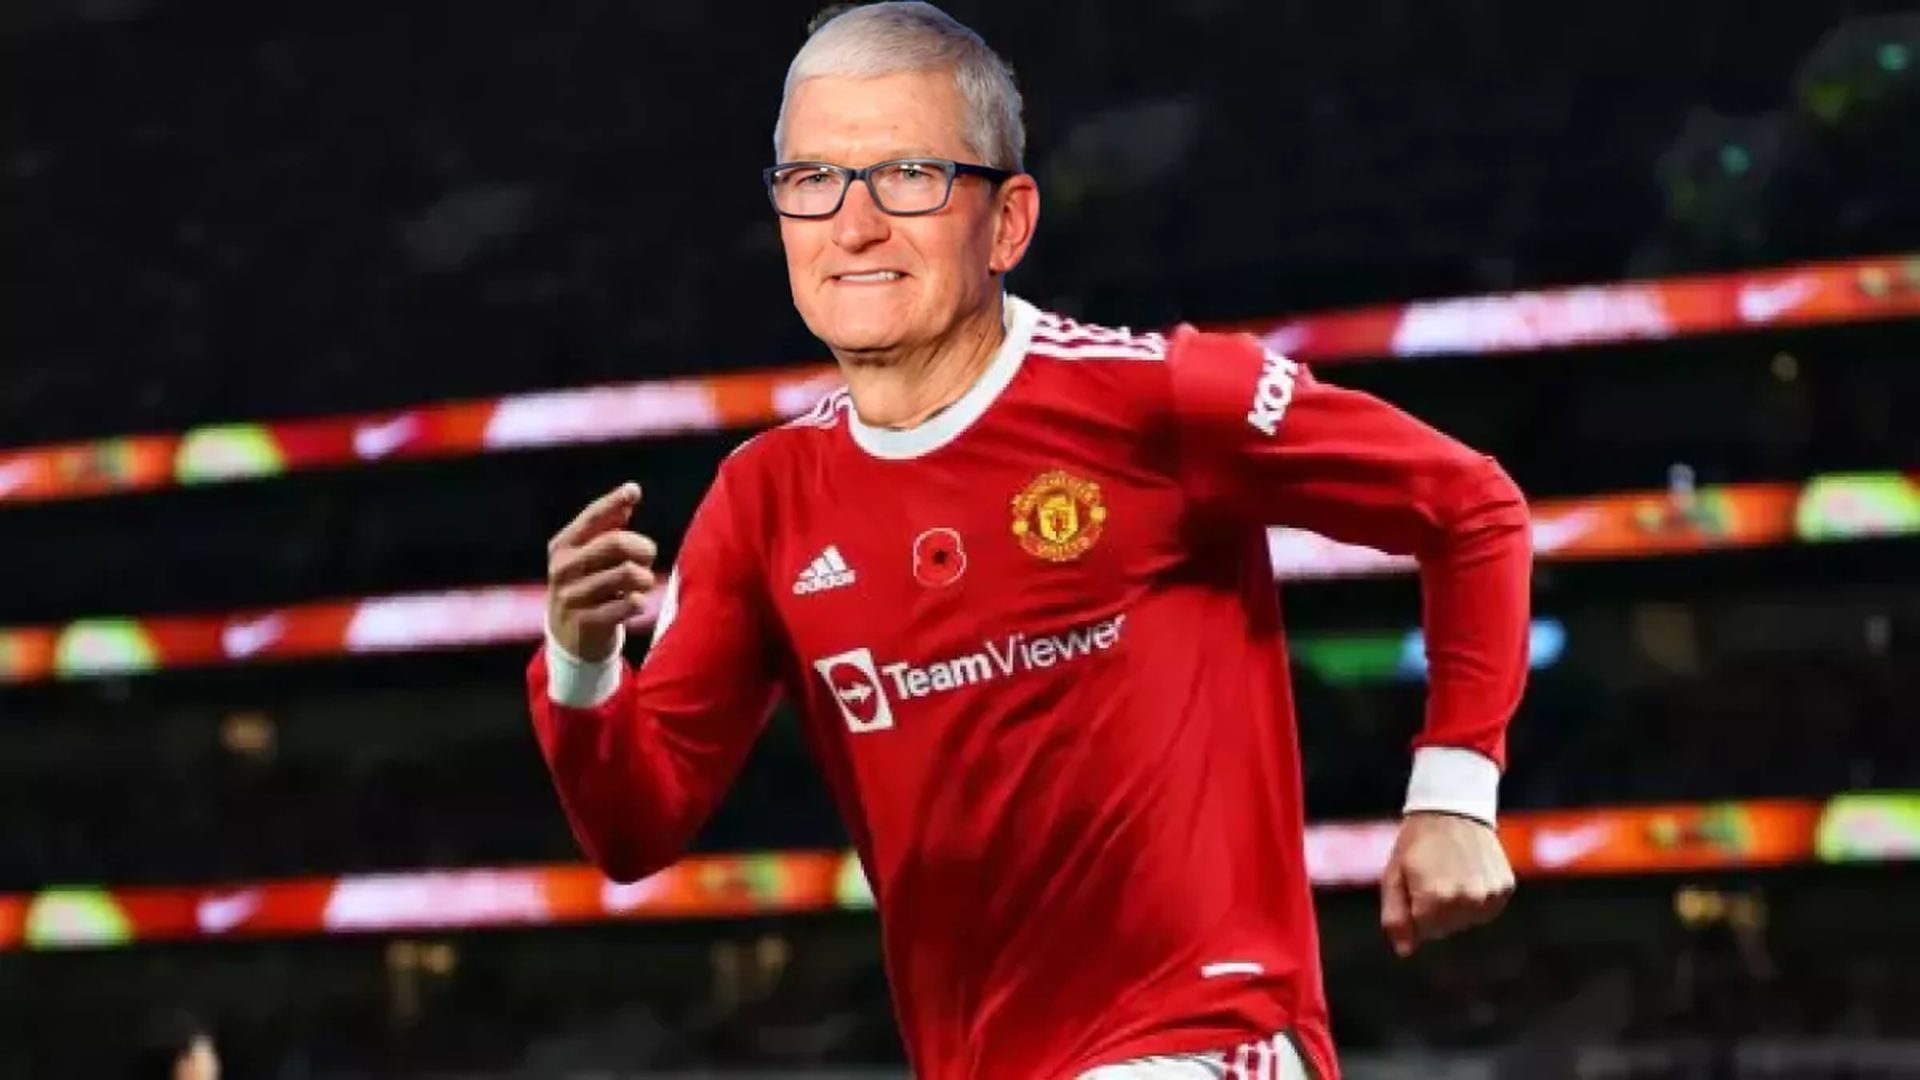 Is Apple buying Manchester United?